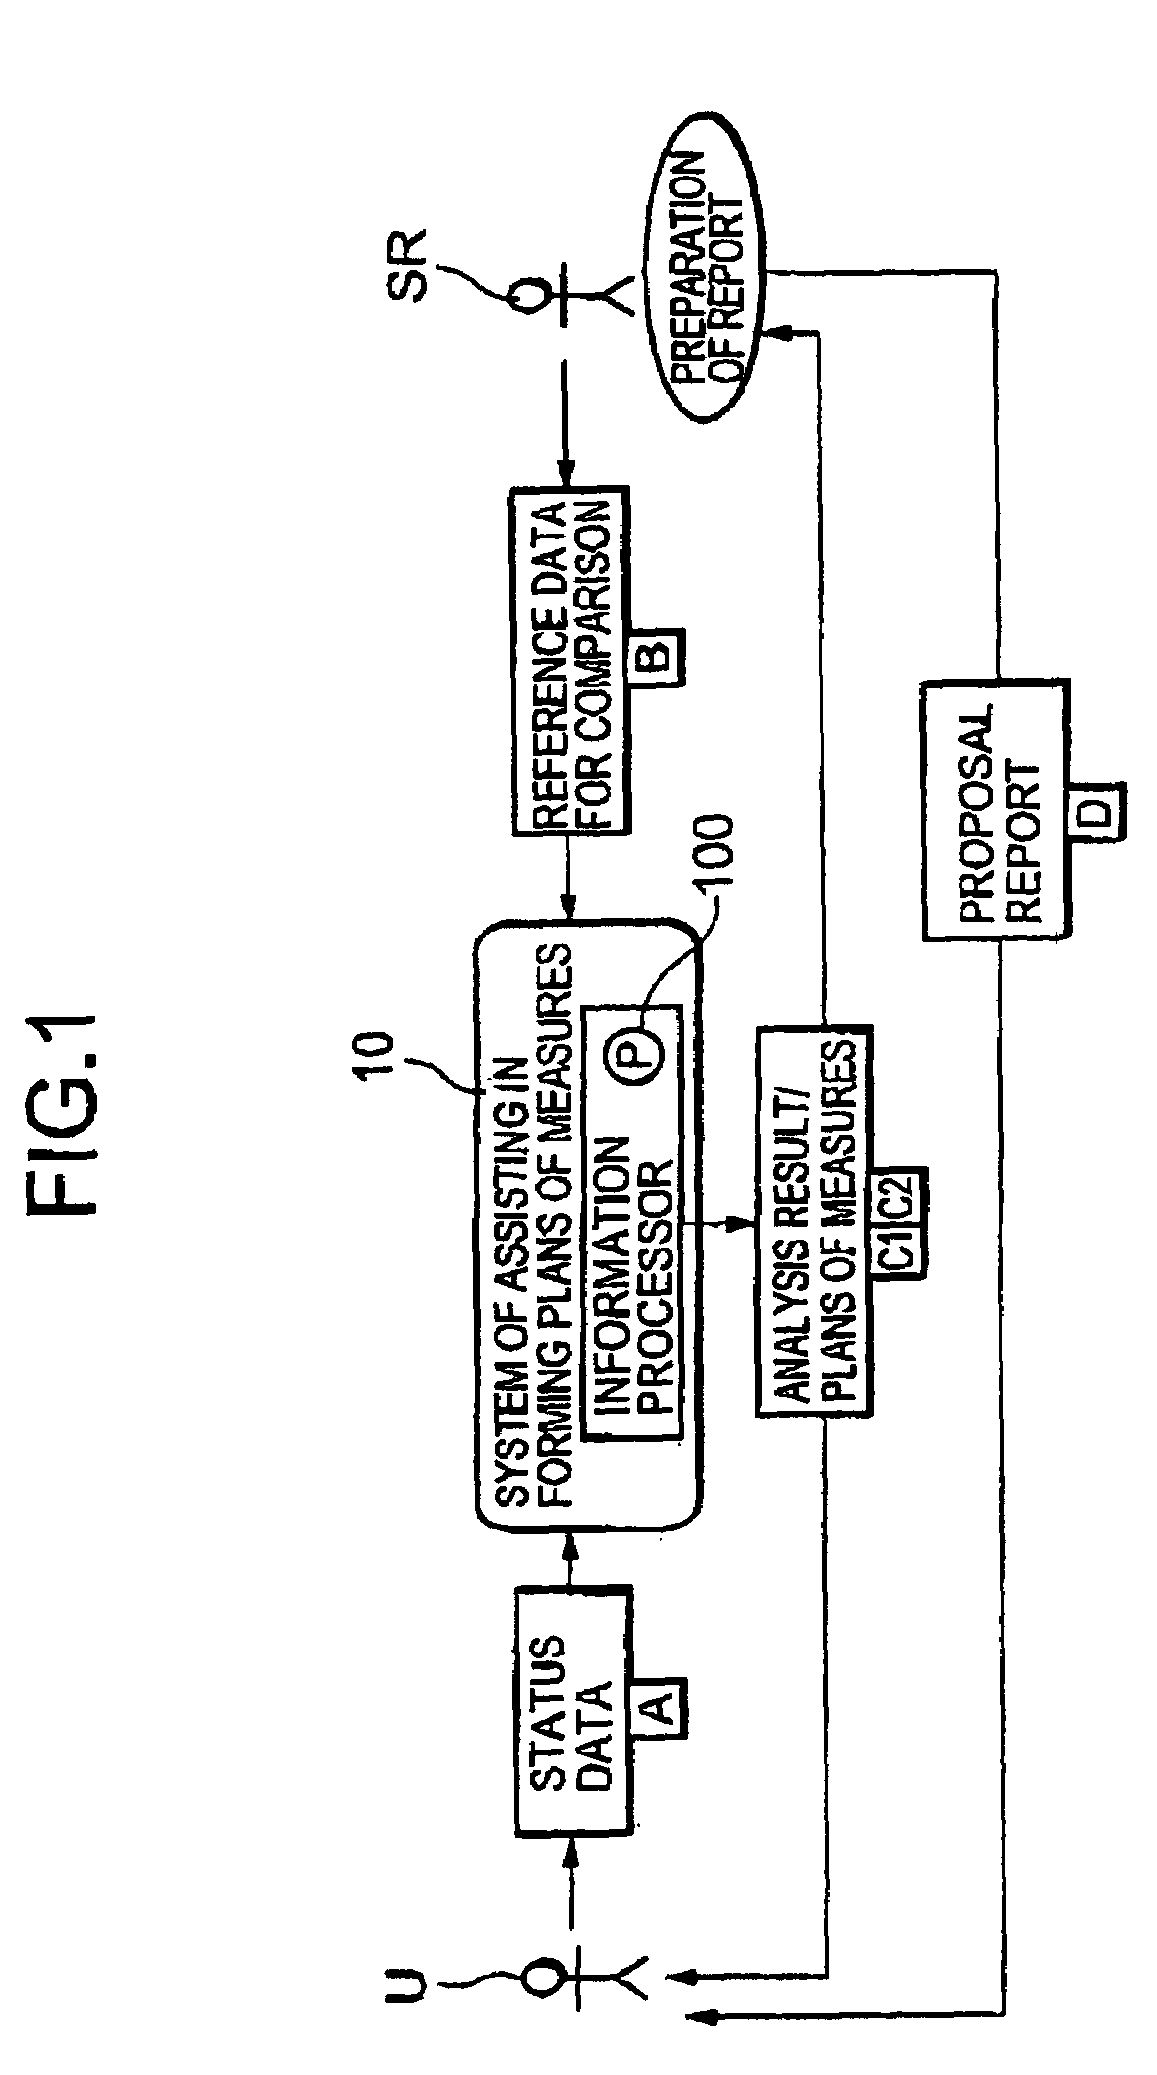 Method of assisting in forming plans of measures of management reforms and system thereof